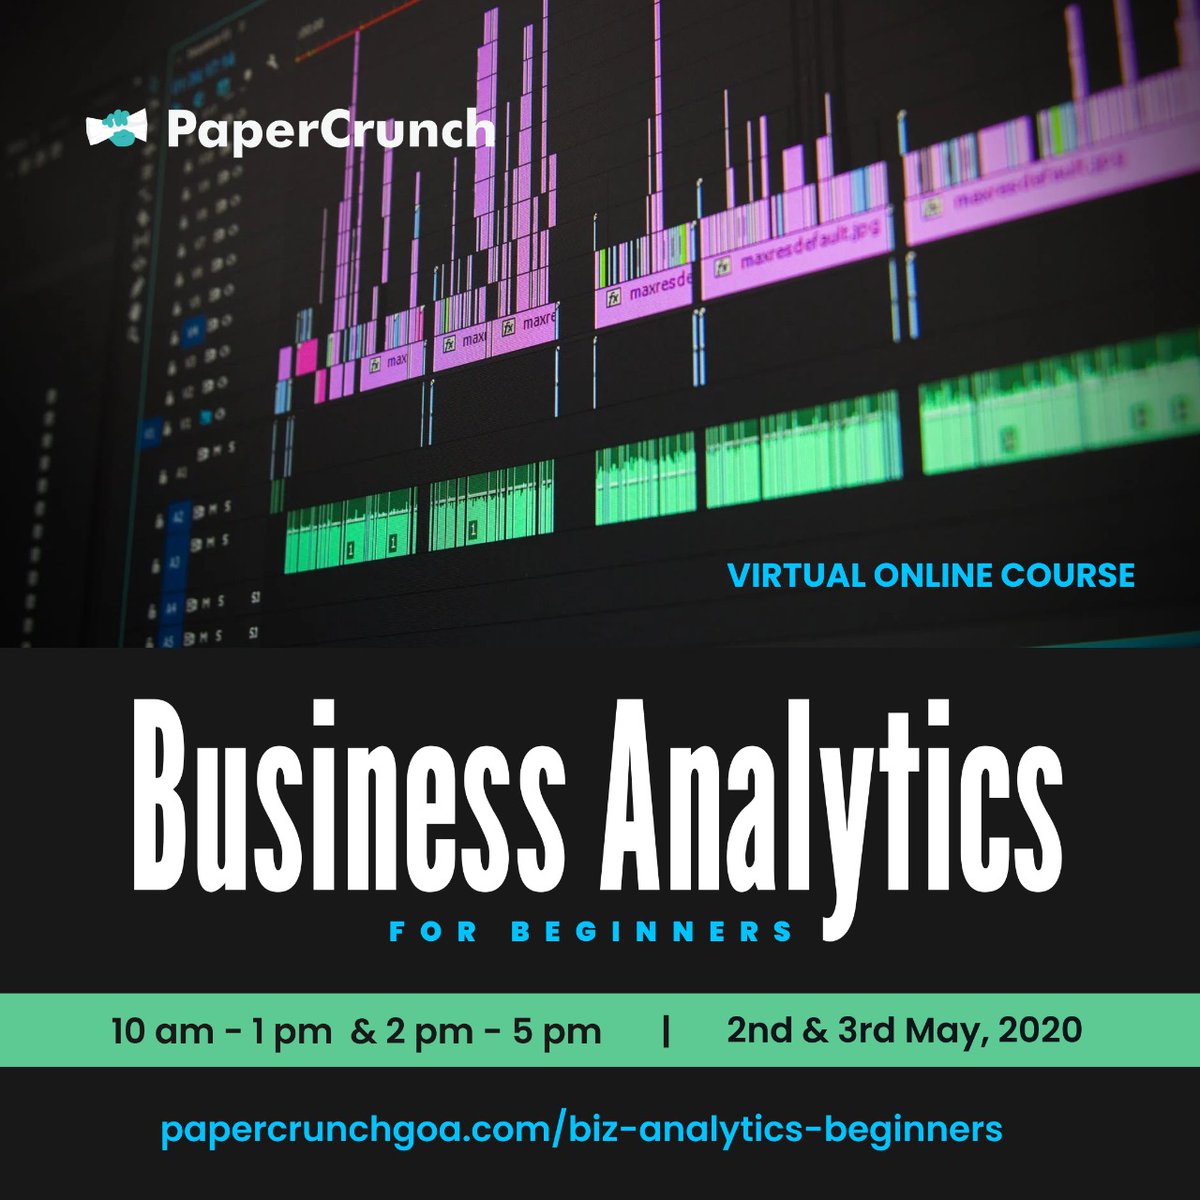 Papercrunch present a one of its kind #businessanalytics virtual course for beginners. This course provides individuals without analytics experience with a solid foundation in core concepts and frameworks.
Register today : papercrunchgoa.com/biz-analytics-…

#virtualcourse #analytics